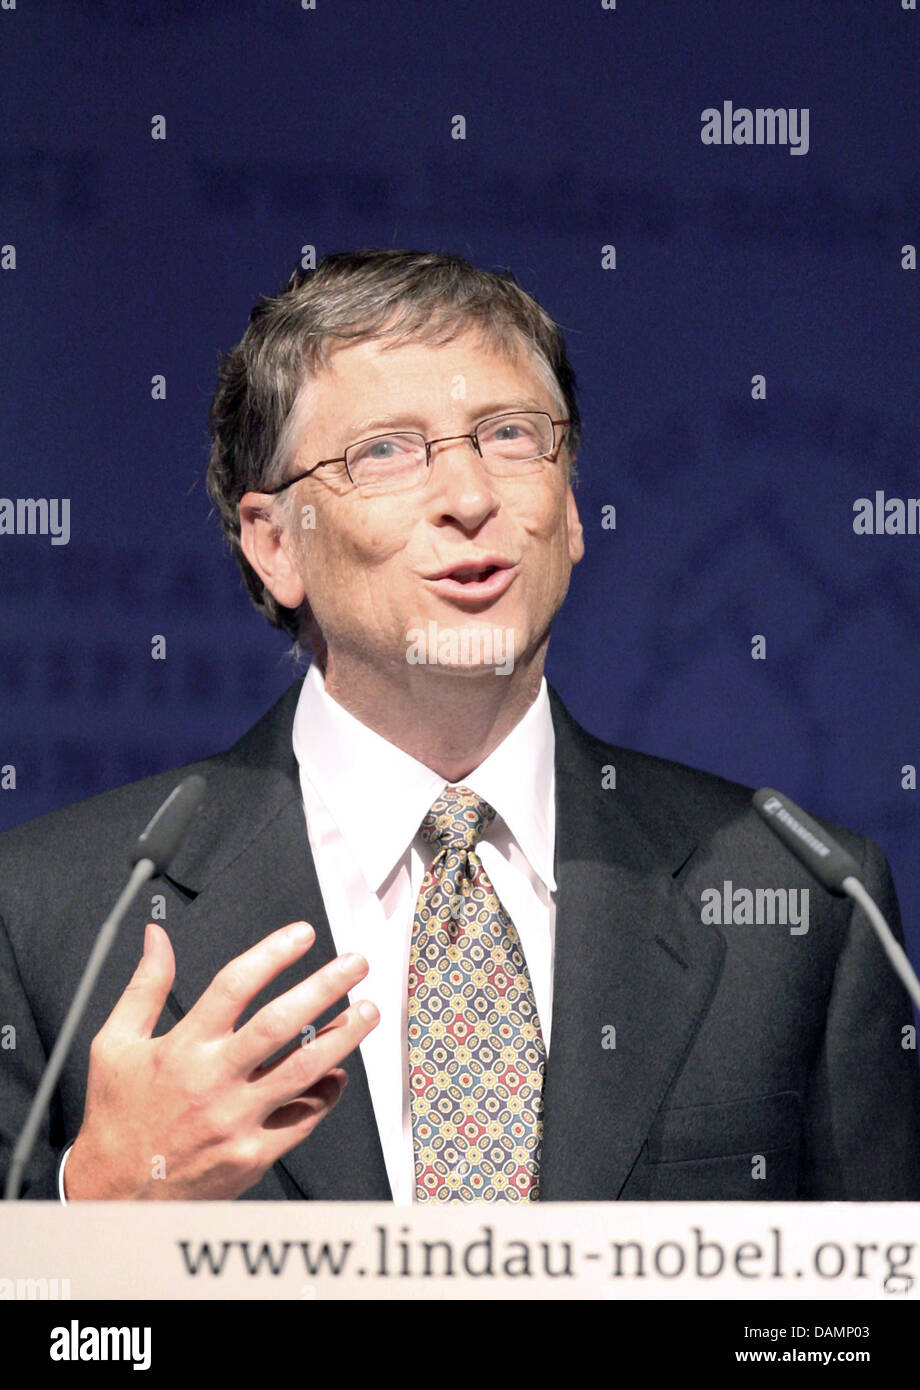 Microsoft founder Bill Gates speaks at the Nobel Laureate Meetings after he reiceived the letter of appointment to the honorary senate of the Nobel Laureate Meetings Foundation in Lindau, Germany, 26 June 2011. World health is in the limelight of the 61st meetings. Photo: Karl-Josef Hildenbrand Stock Photo